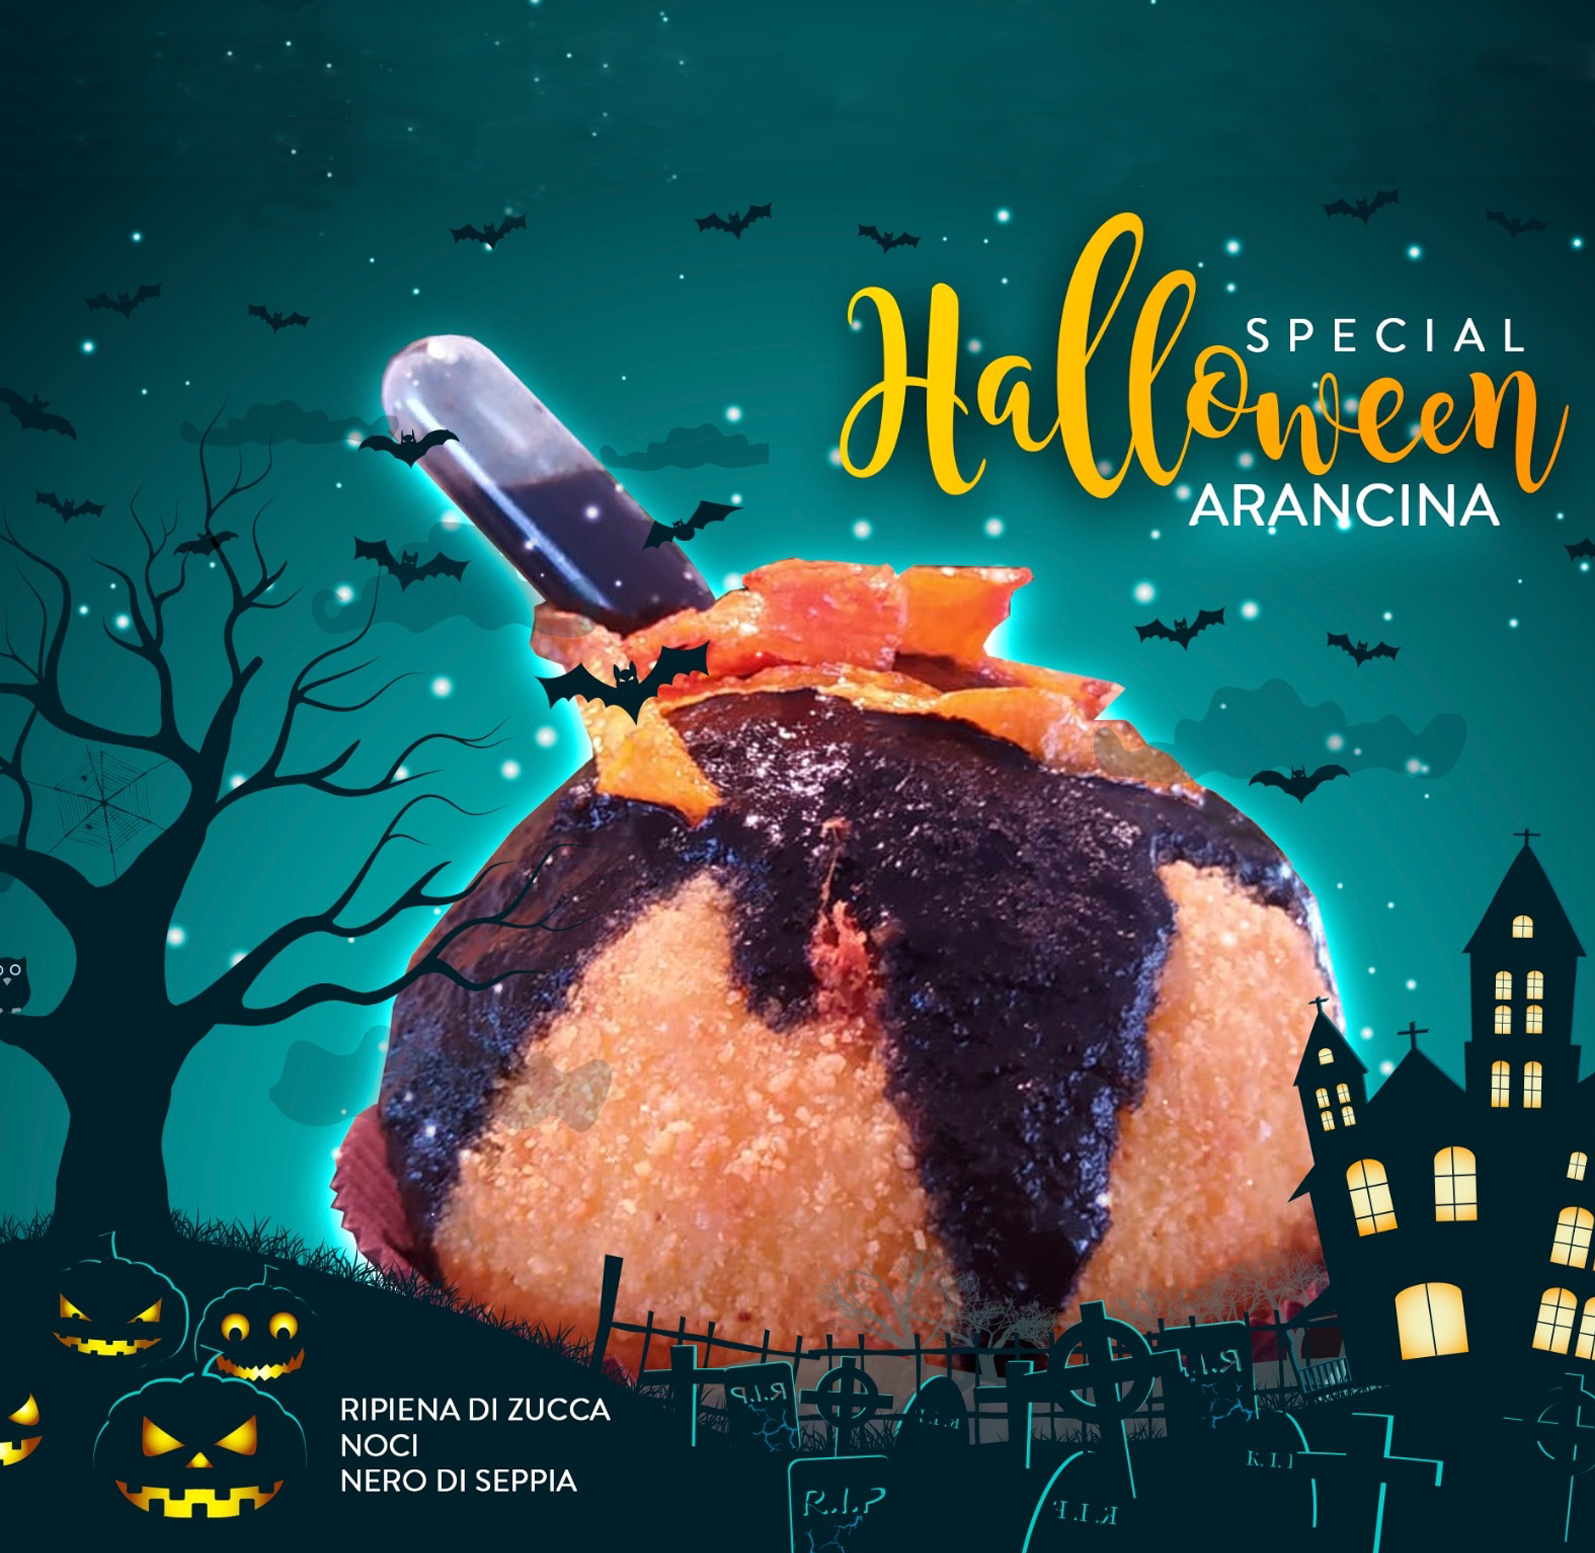 You are currently viewing Arancina Halloween, limited edition!